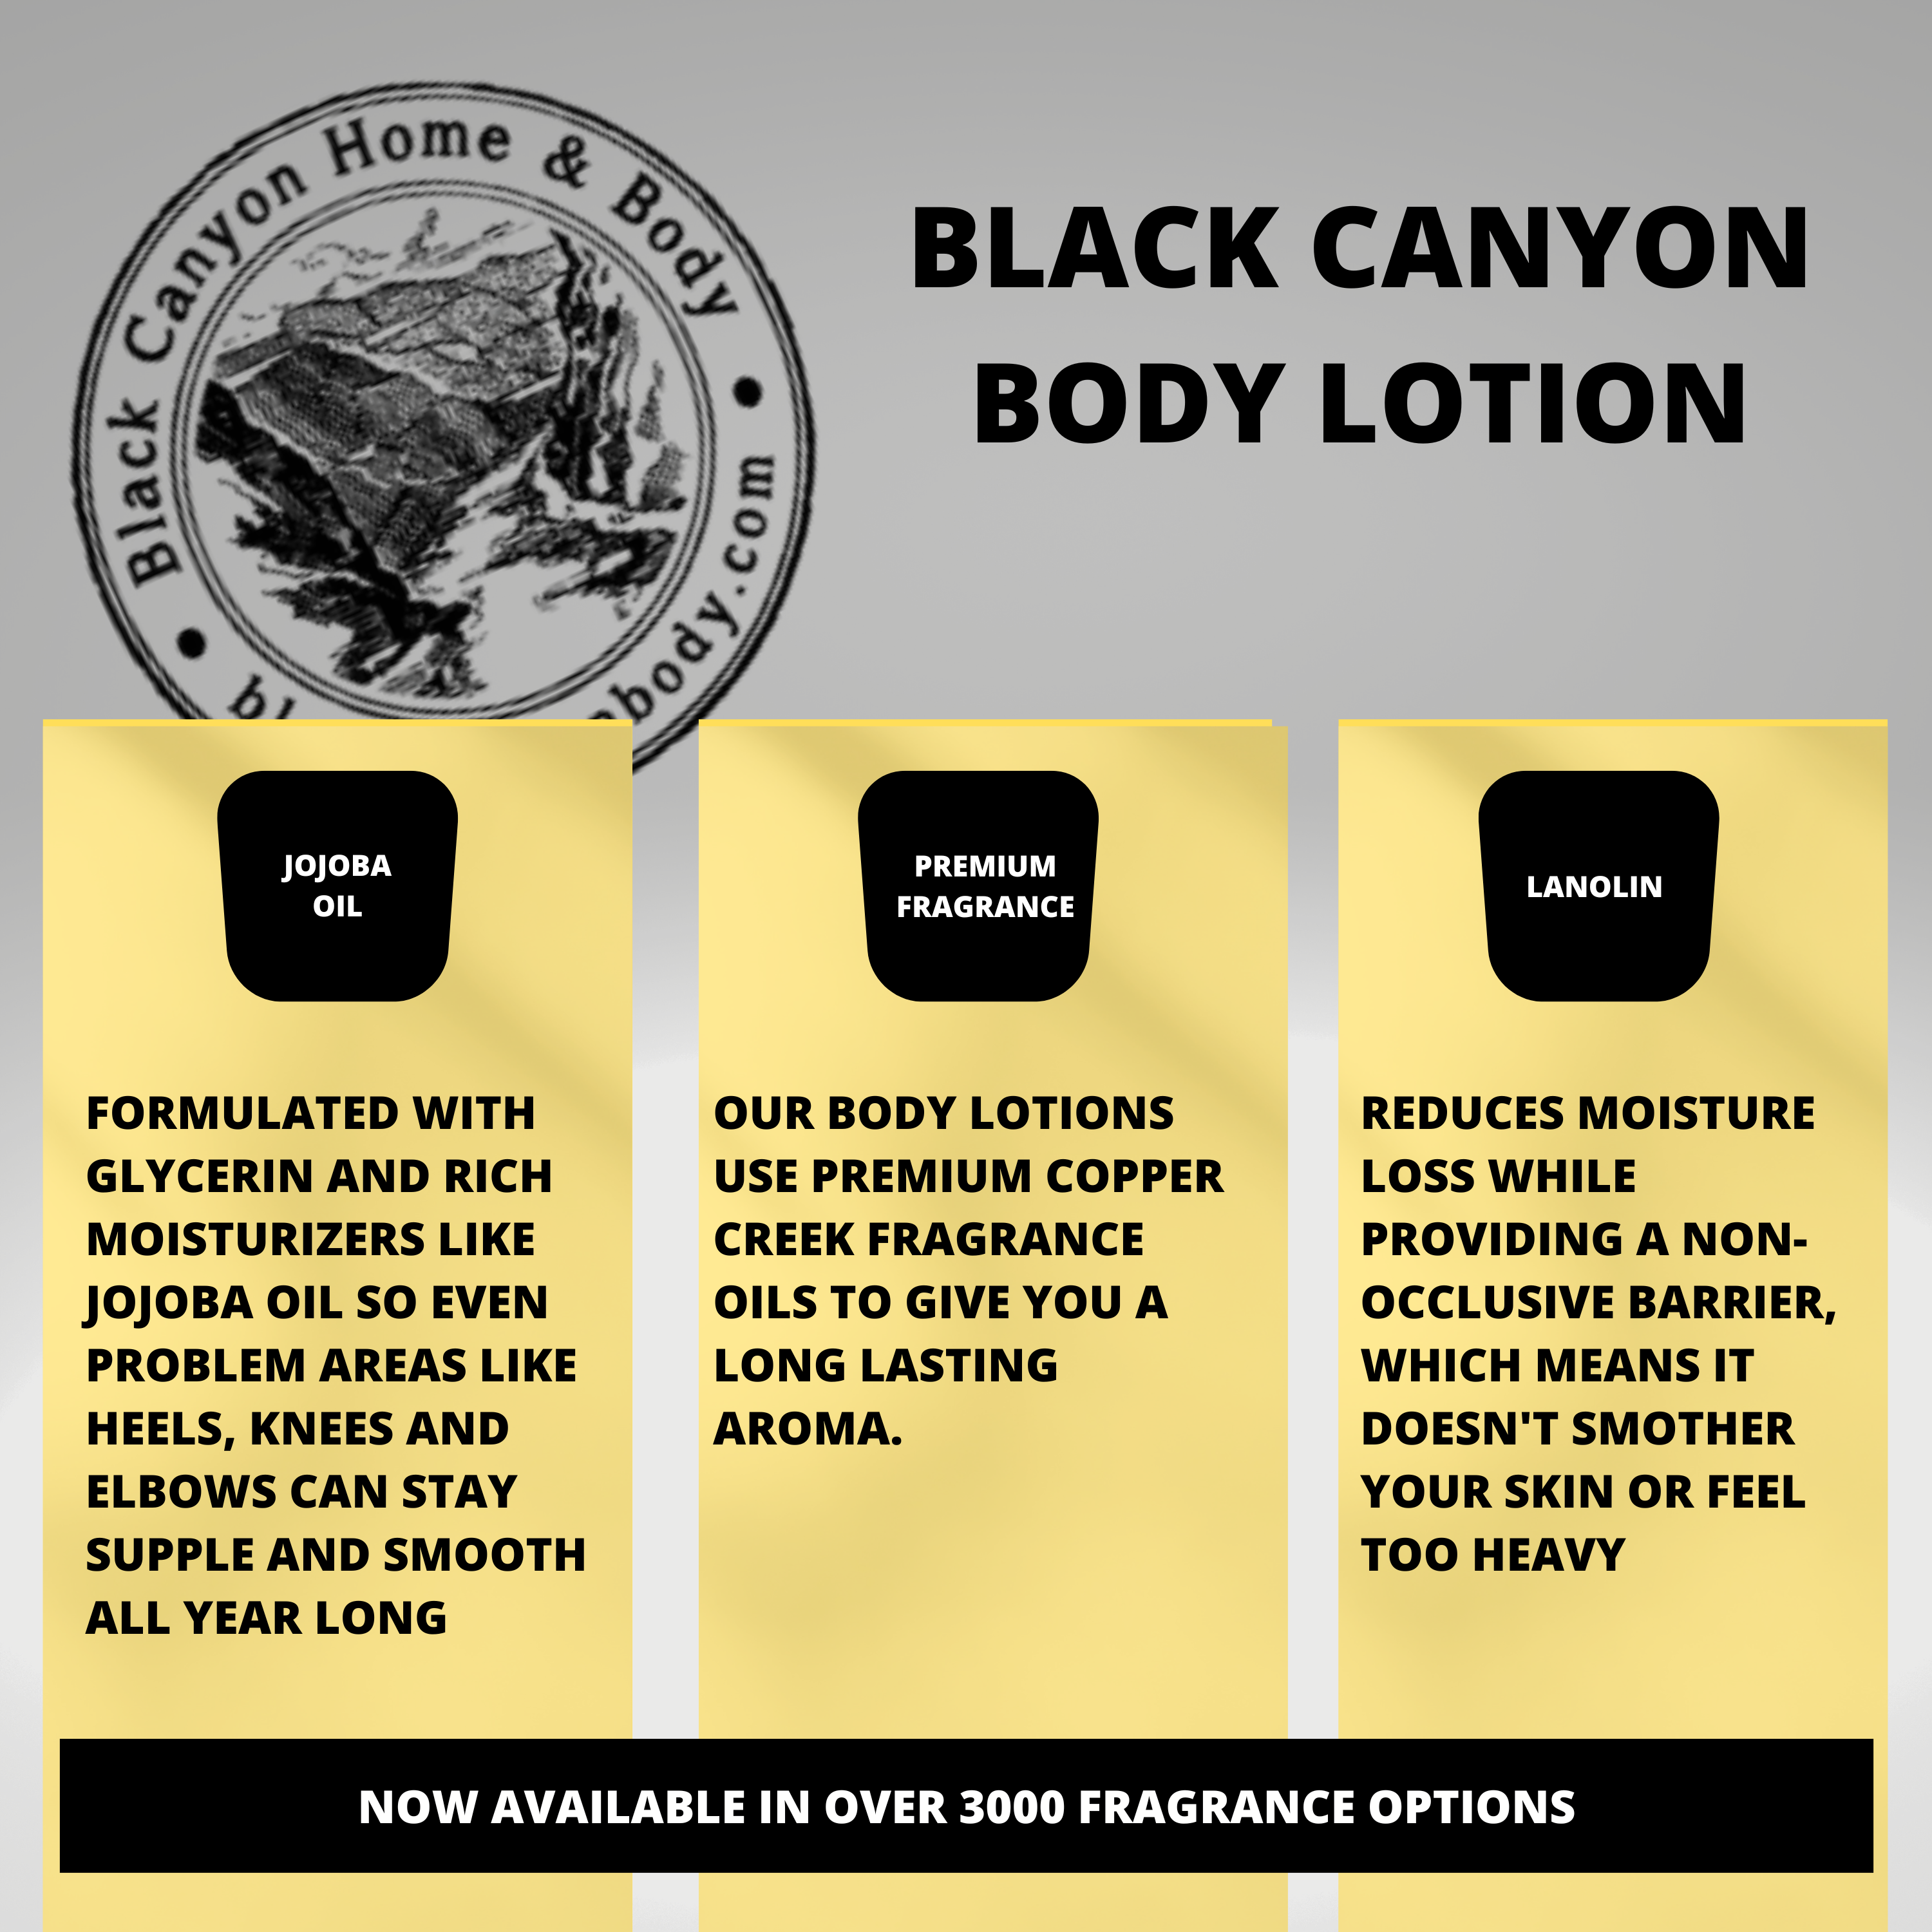 Black Canyon Lily & Rose Scented Luxury Body Lotion with Lanolin and Jojoba Oil